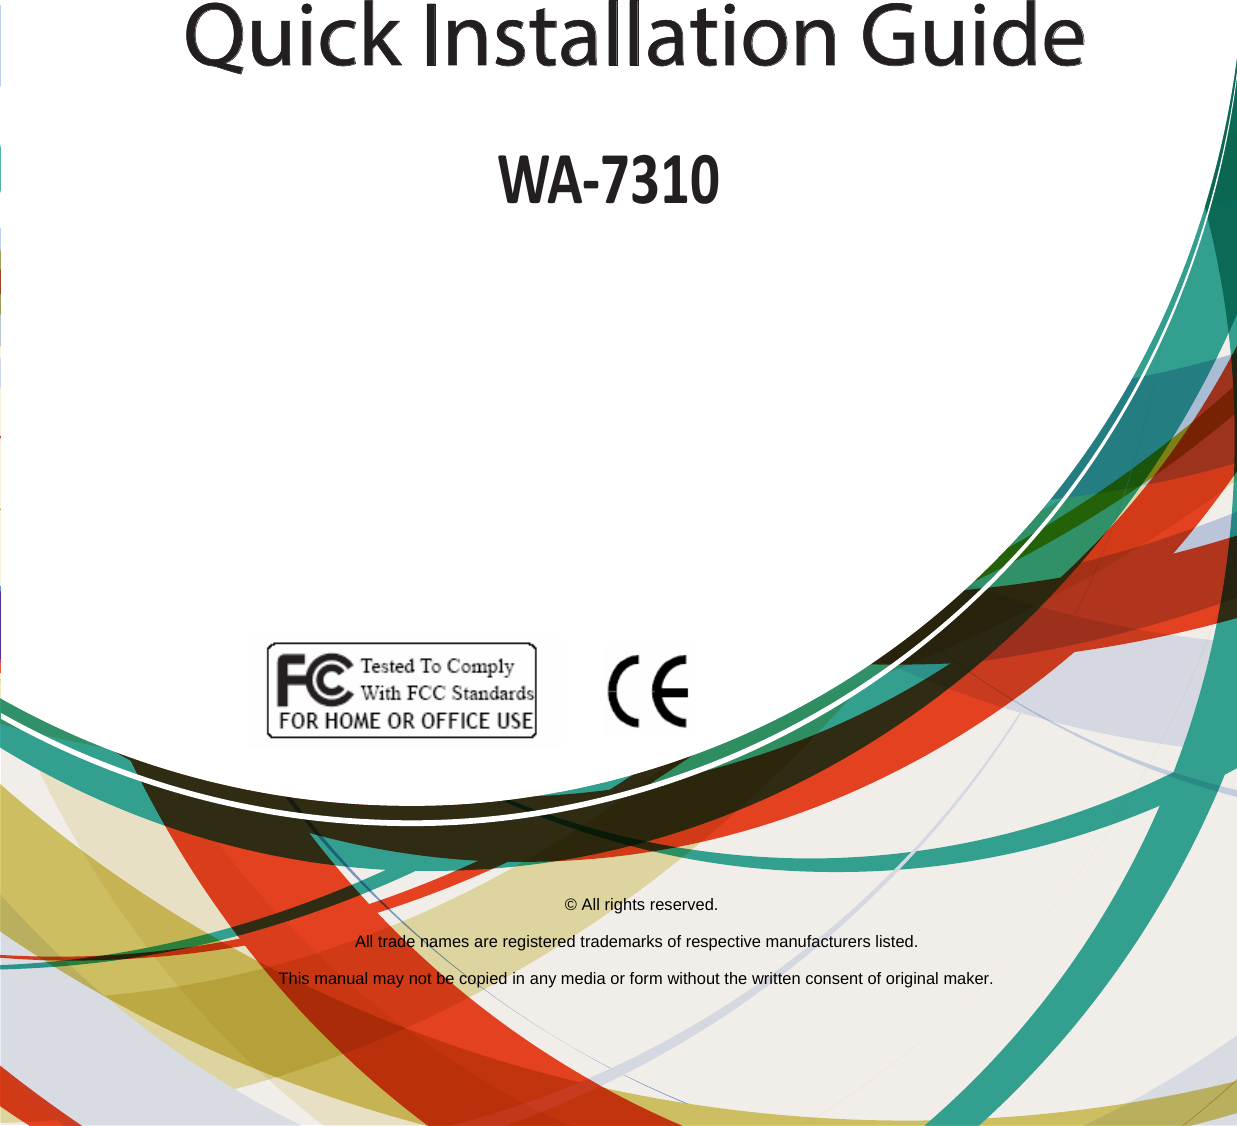 Quick Installation GuideWA-7310© All rights reserved. All trade names are registered trademarks of respective manufacturers listed. This manual may not be copied in any media or form without the written consent of original maker. 